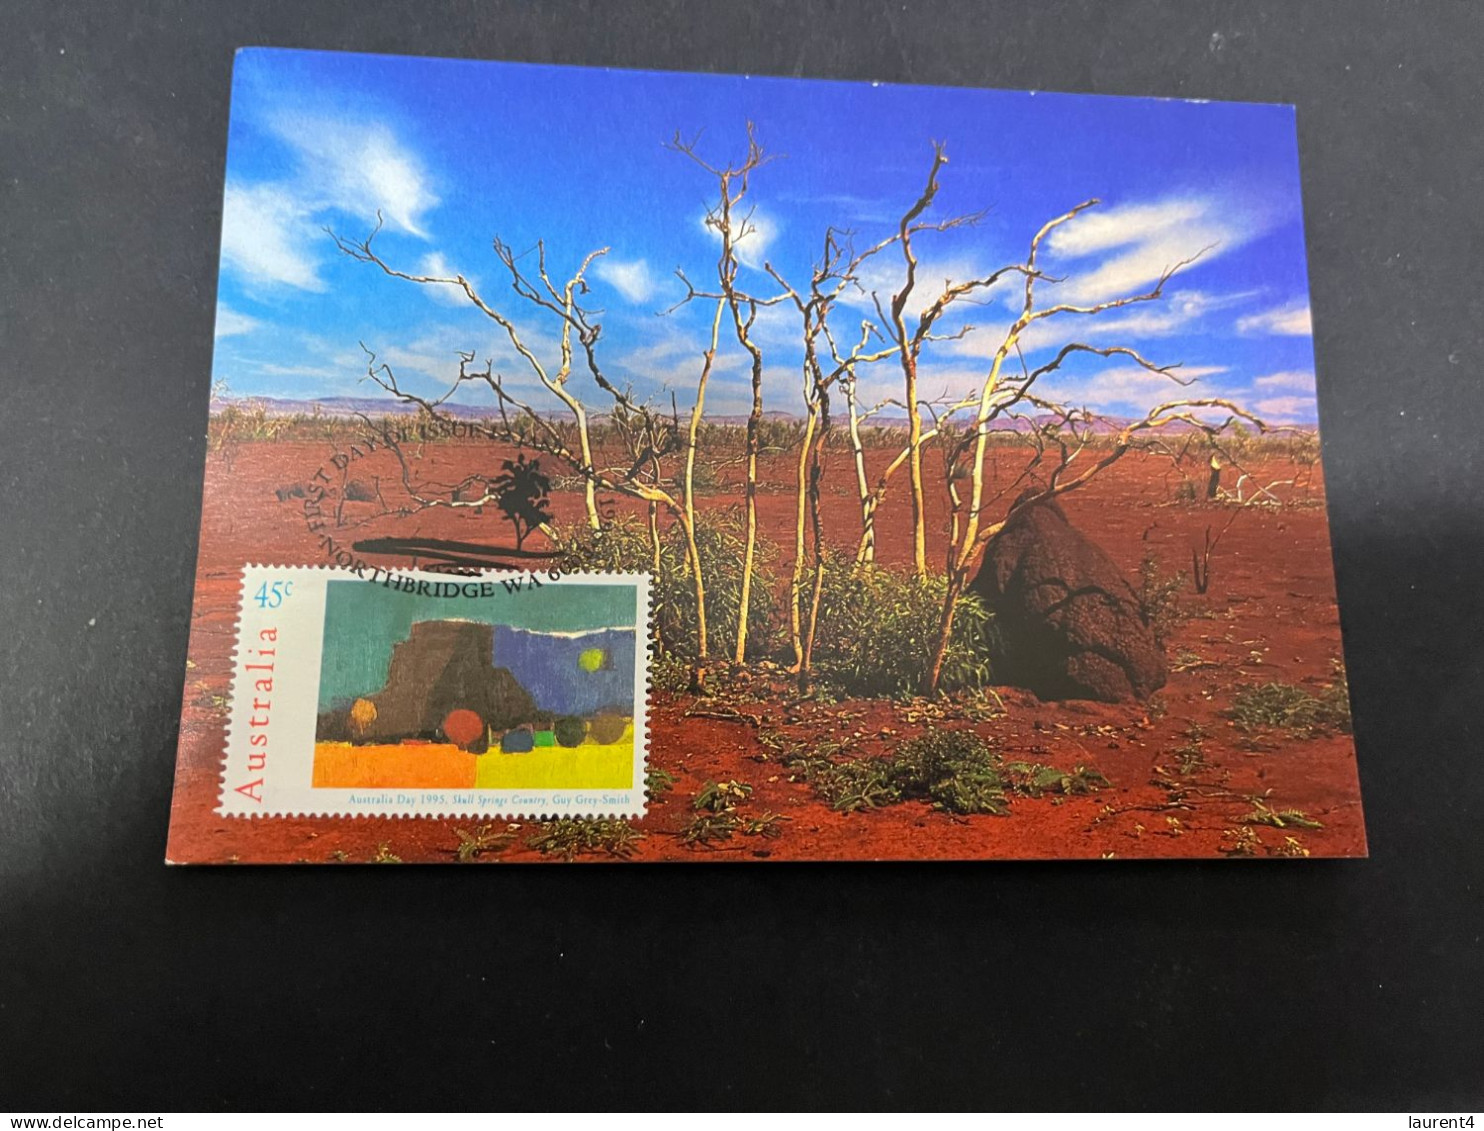 18-4-2024 (2 Z 25 A) Australia Maxicard (4 Country-side Views) If No Bid - This Items Will NOT Be Re-listed For Sale - Cartes-Maximum (CM)